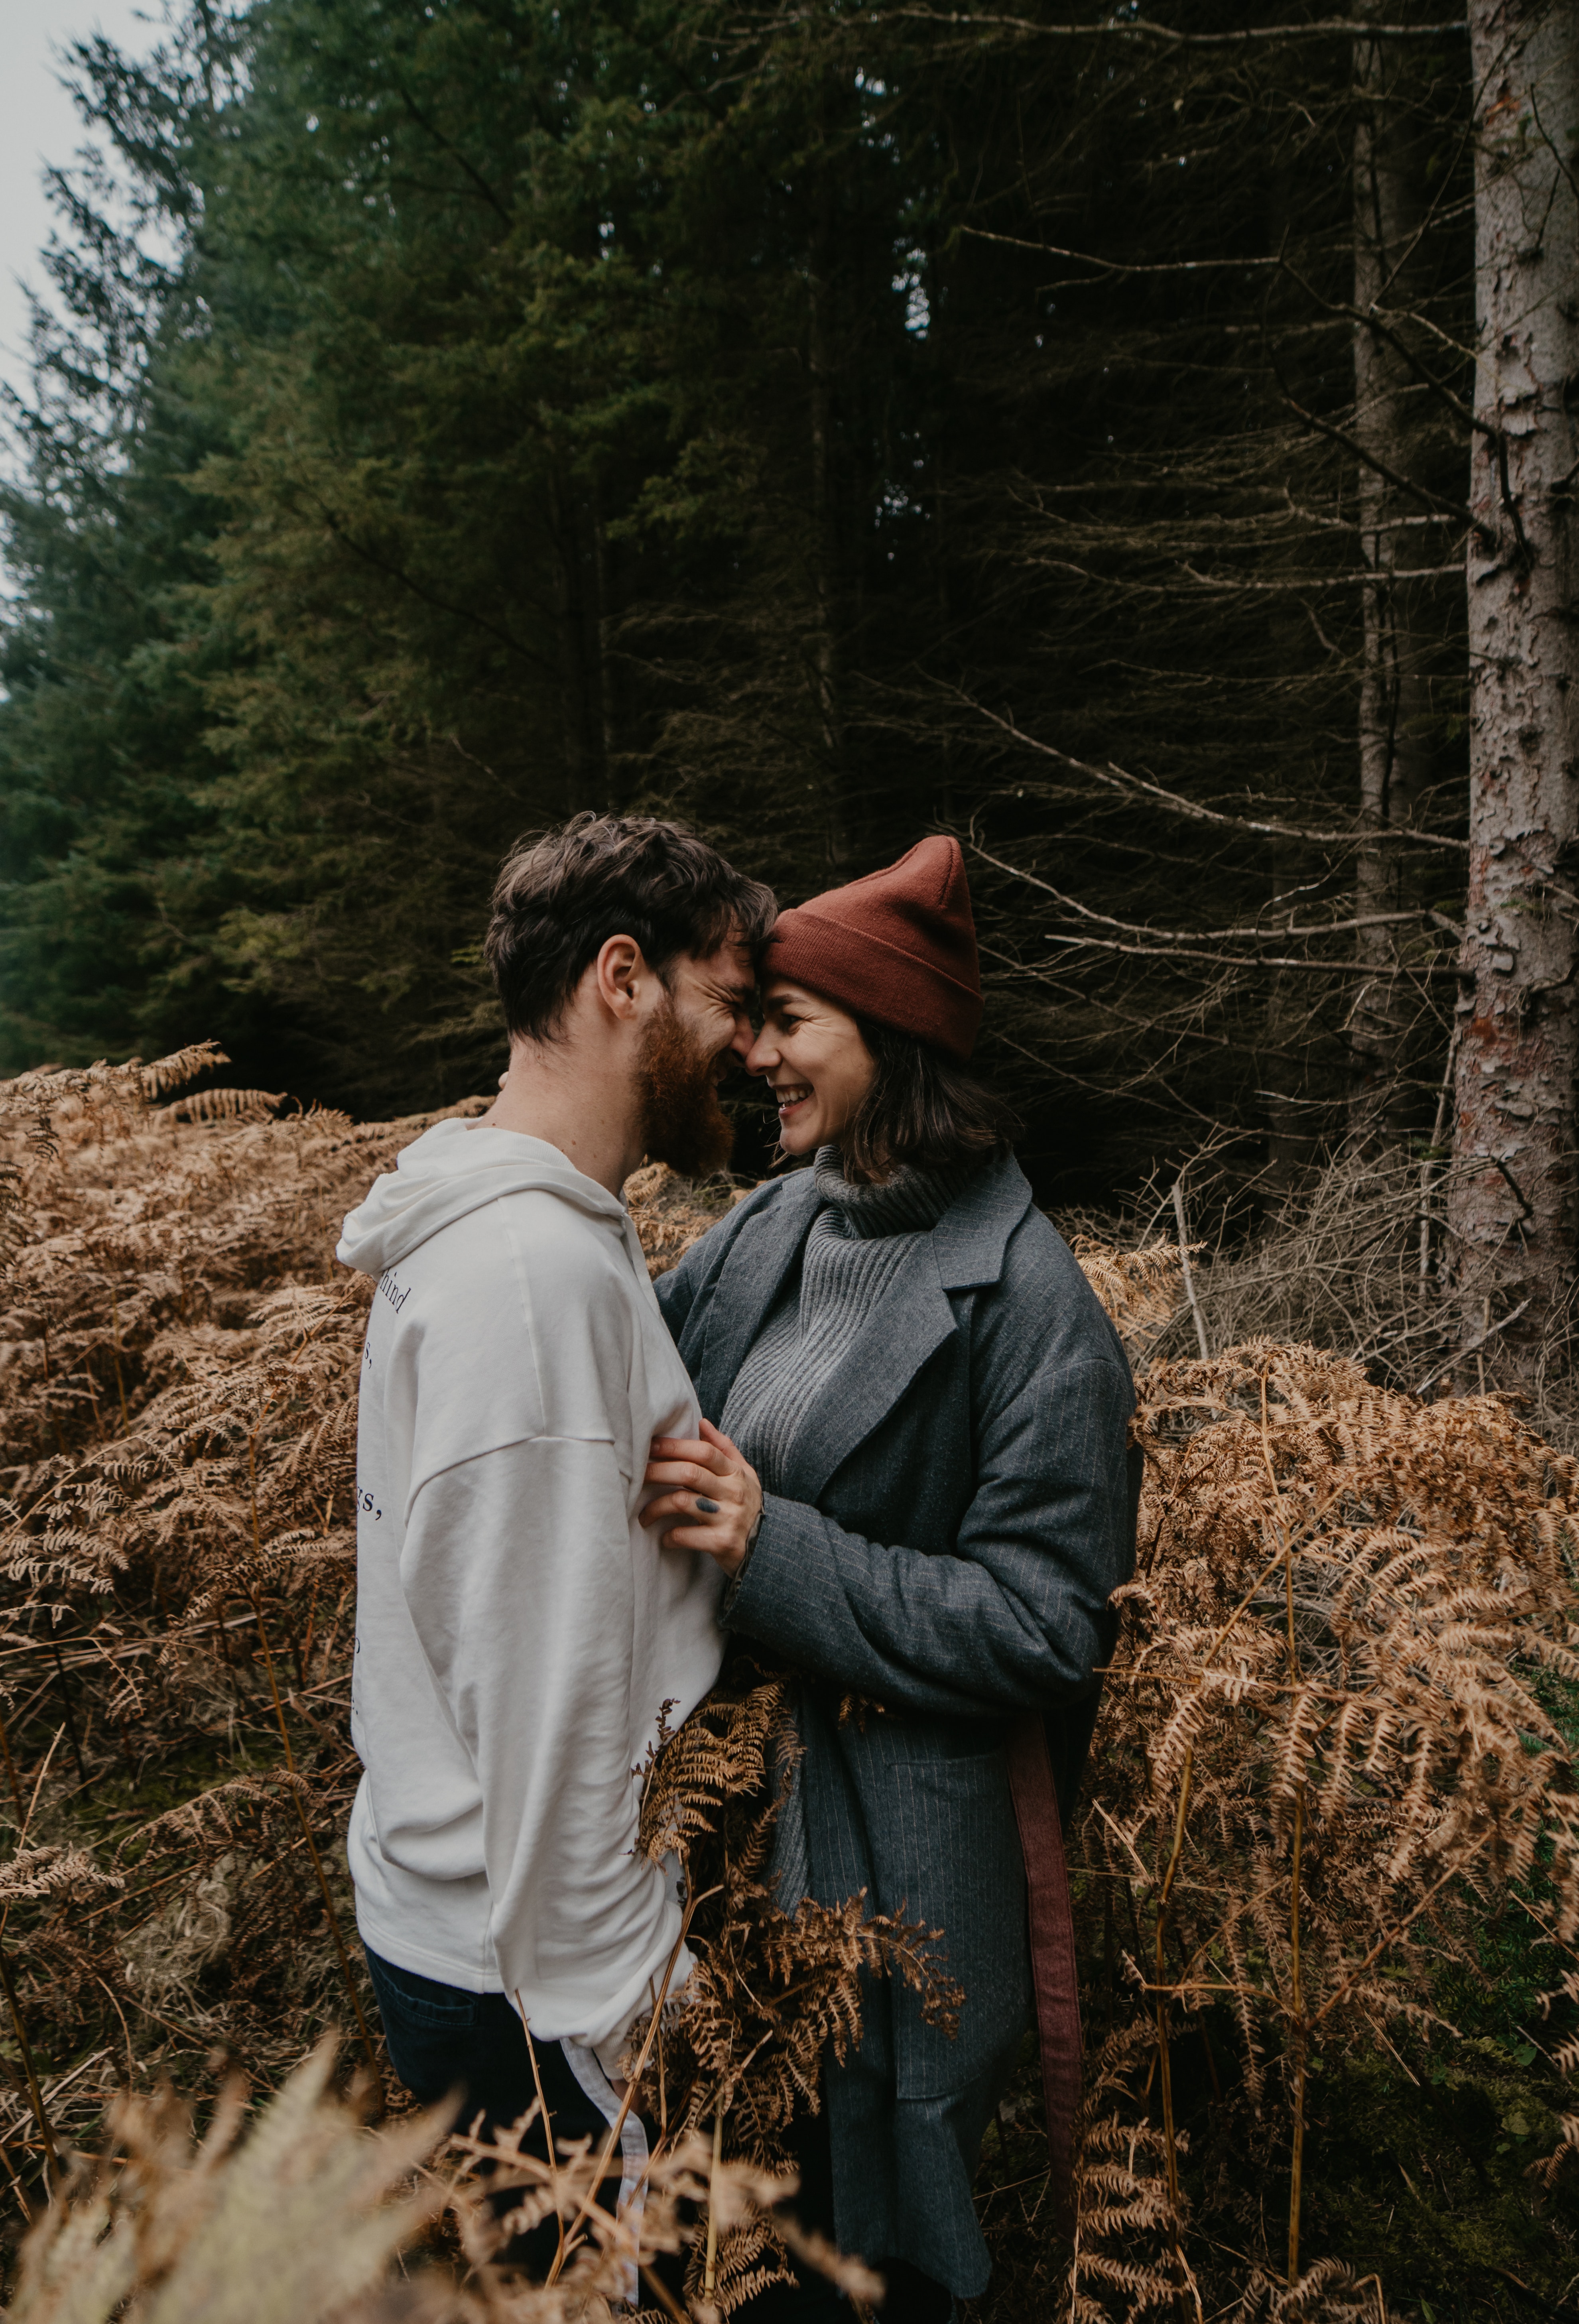 A photo of a man and woman kissing in the forest | Source: Unsplash